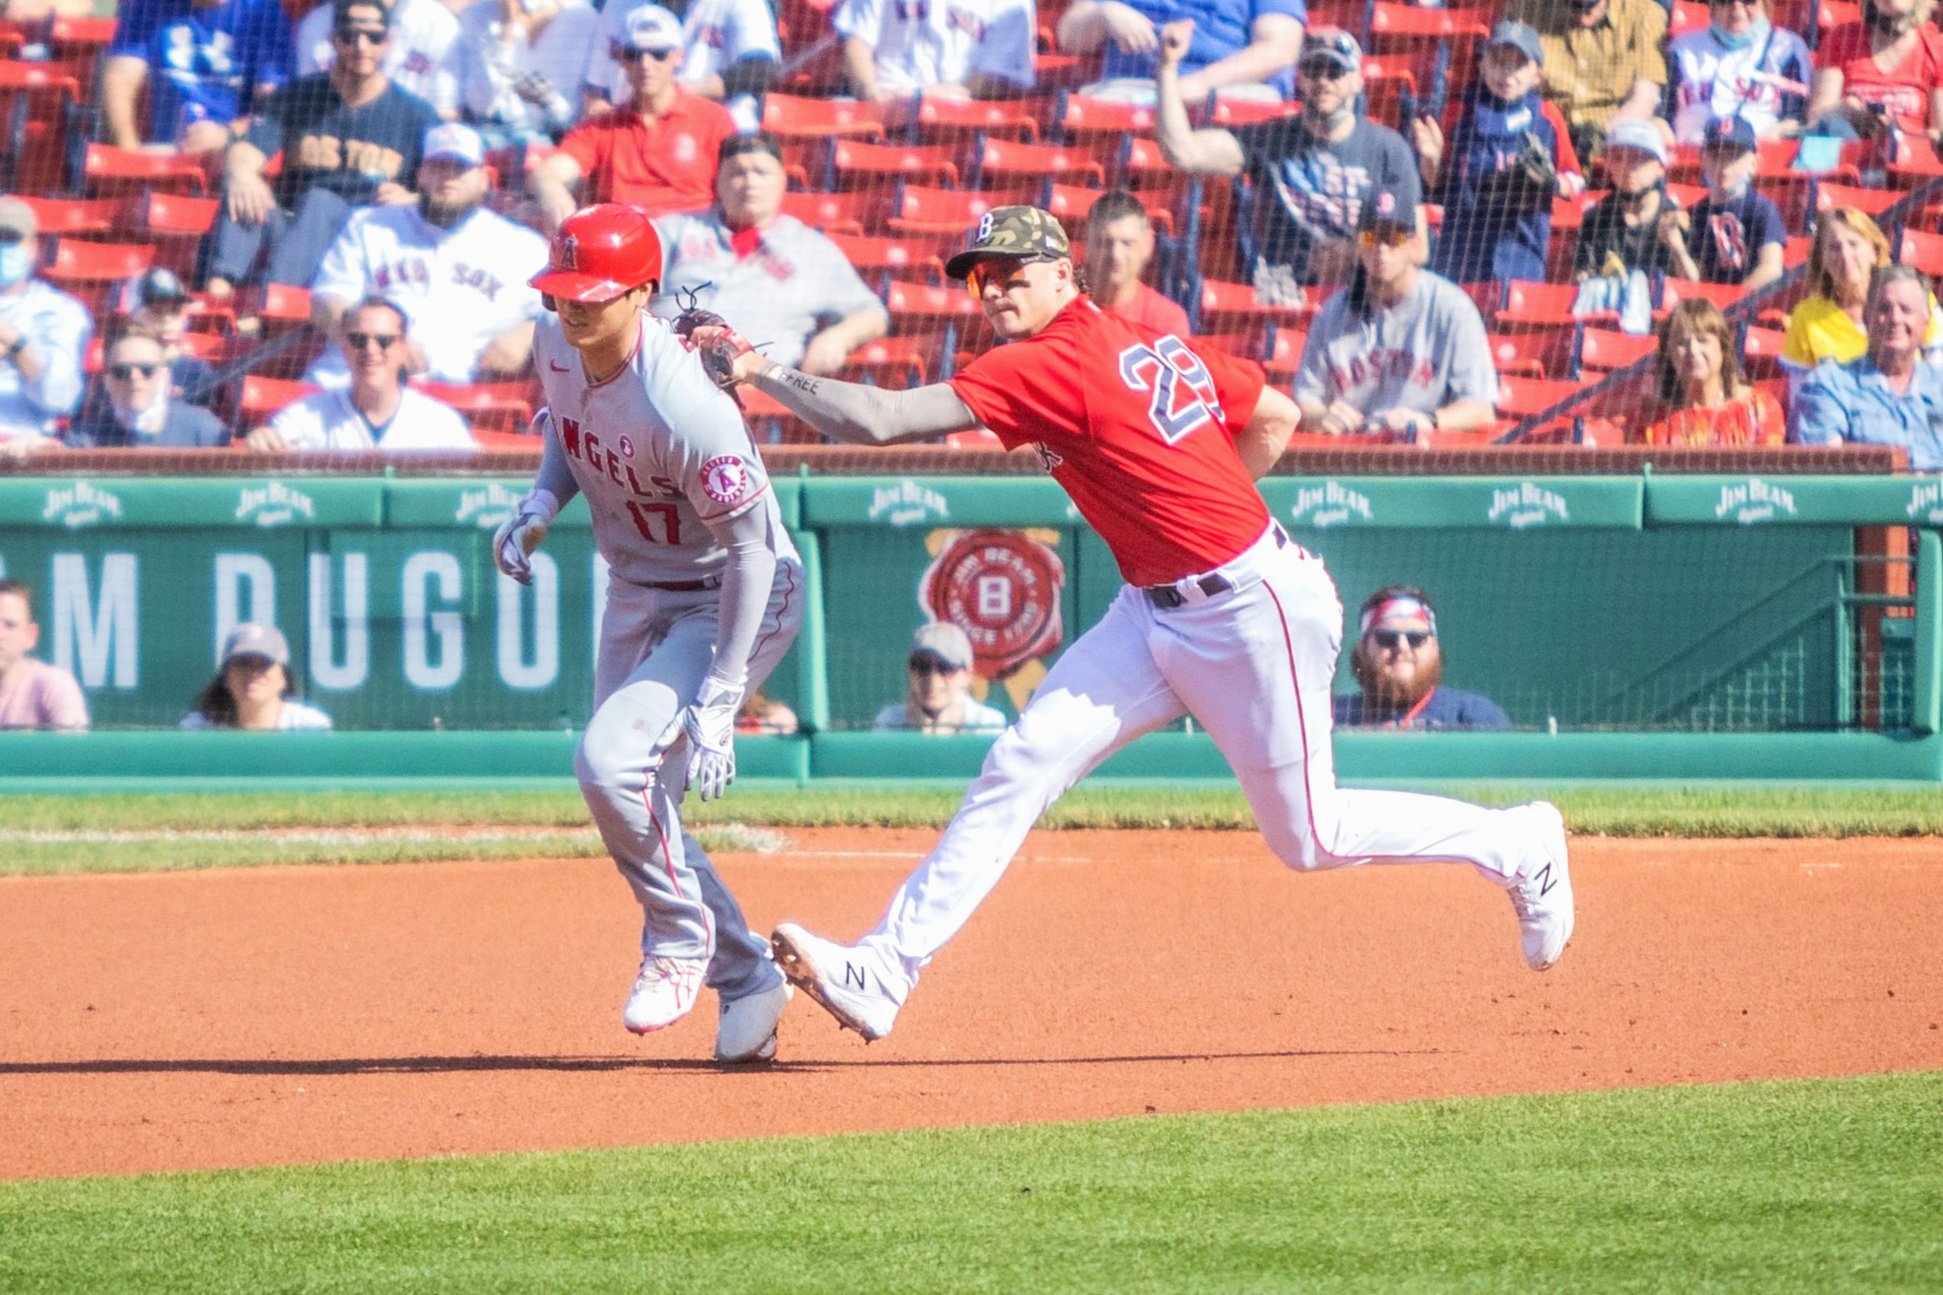 Angels hitting/pitching dual threat Shohei Ohtani is tagged out in a rundown, Boston, May 2021.